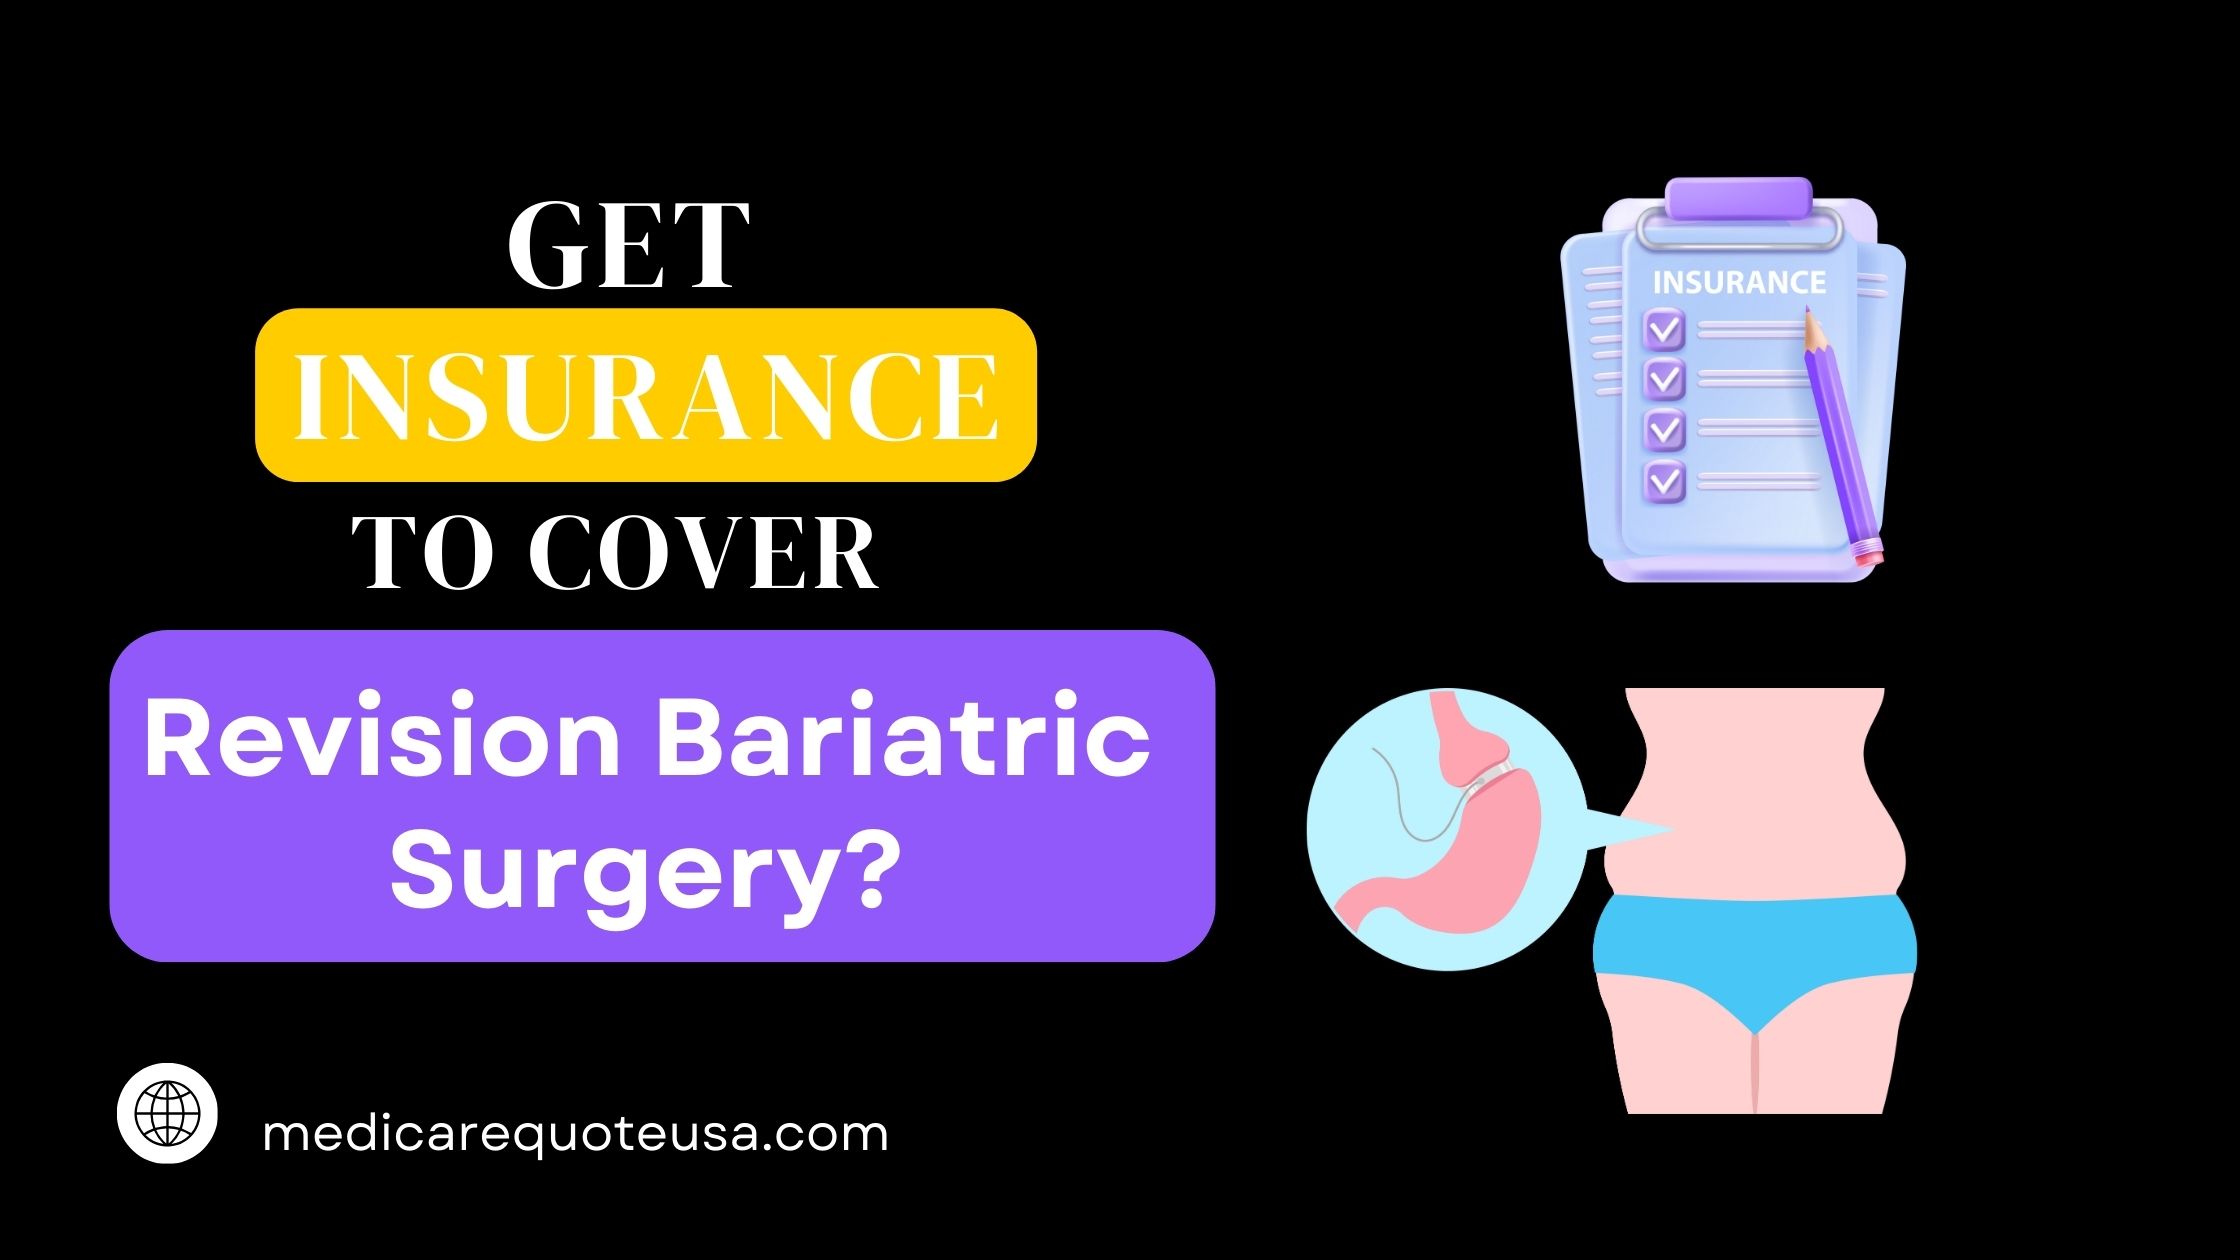 How to Get Insurance to Cover Revision Bariatric Surgery in USA